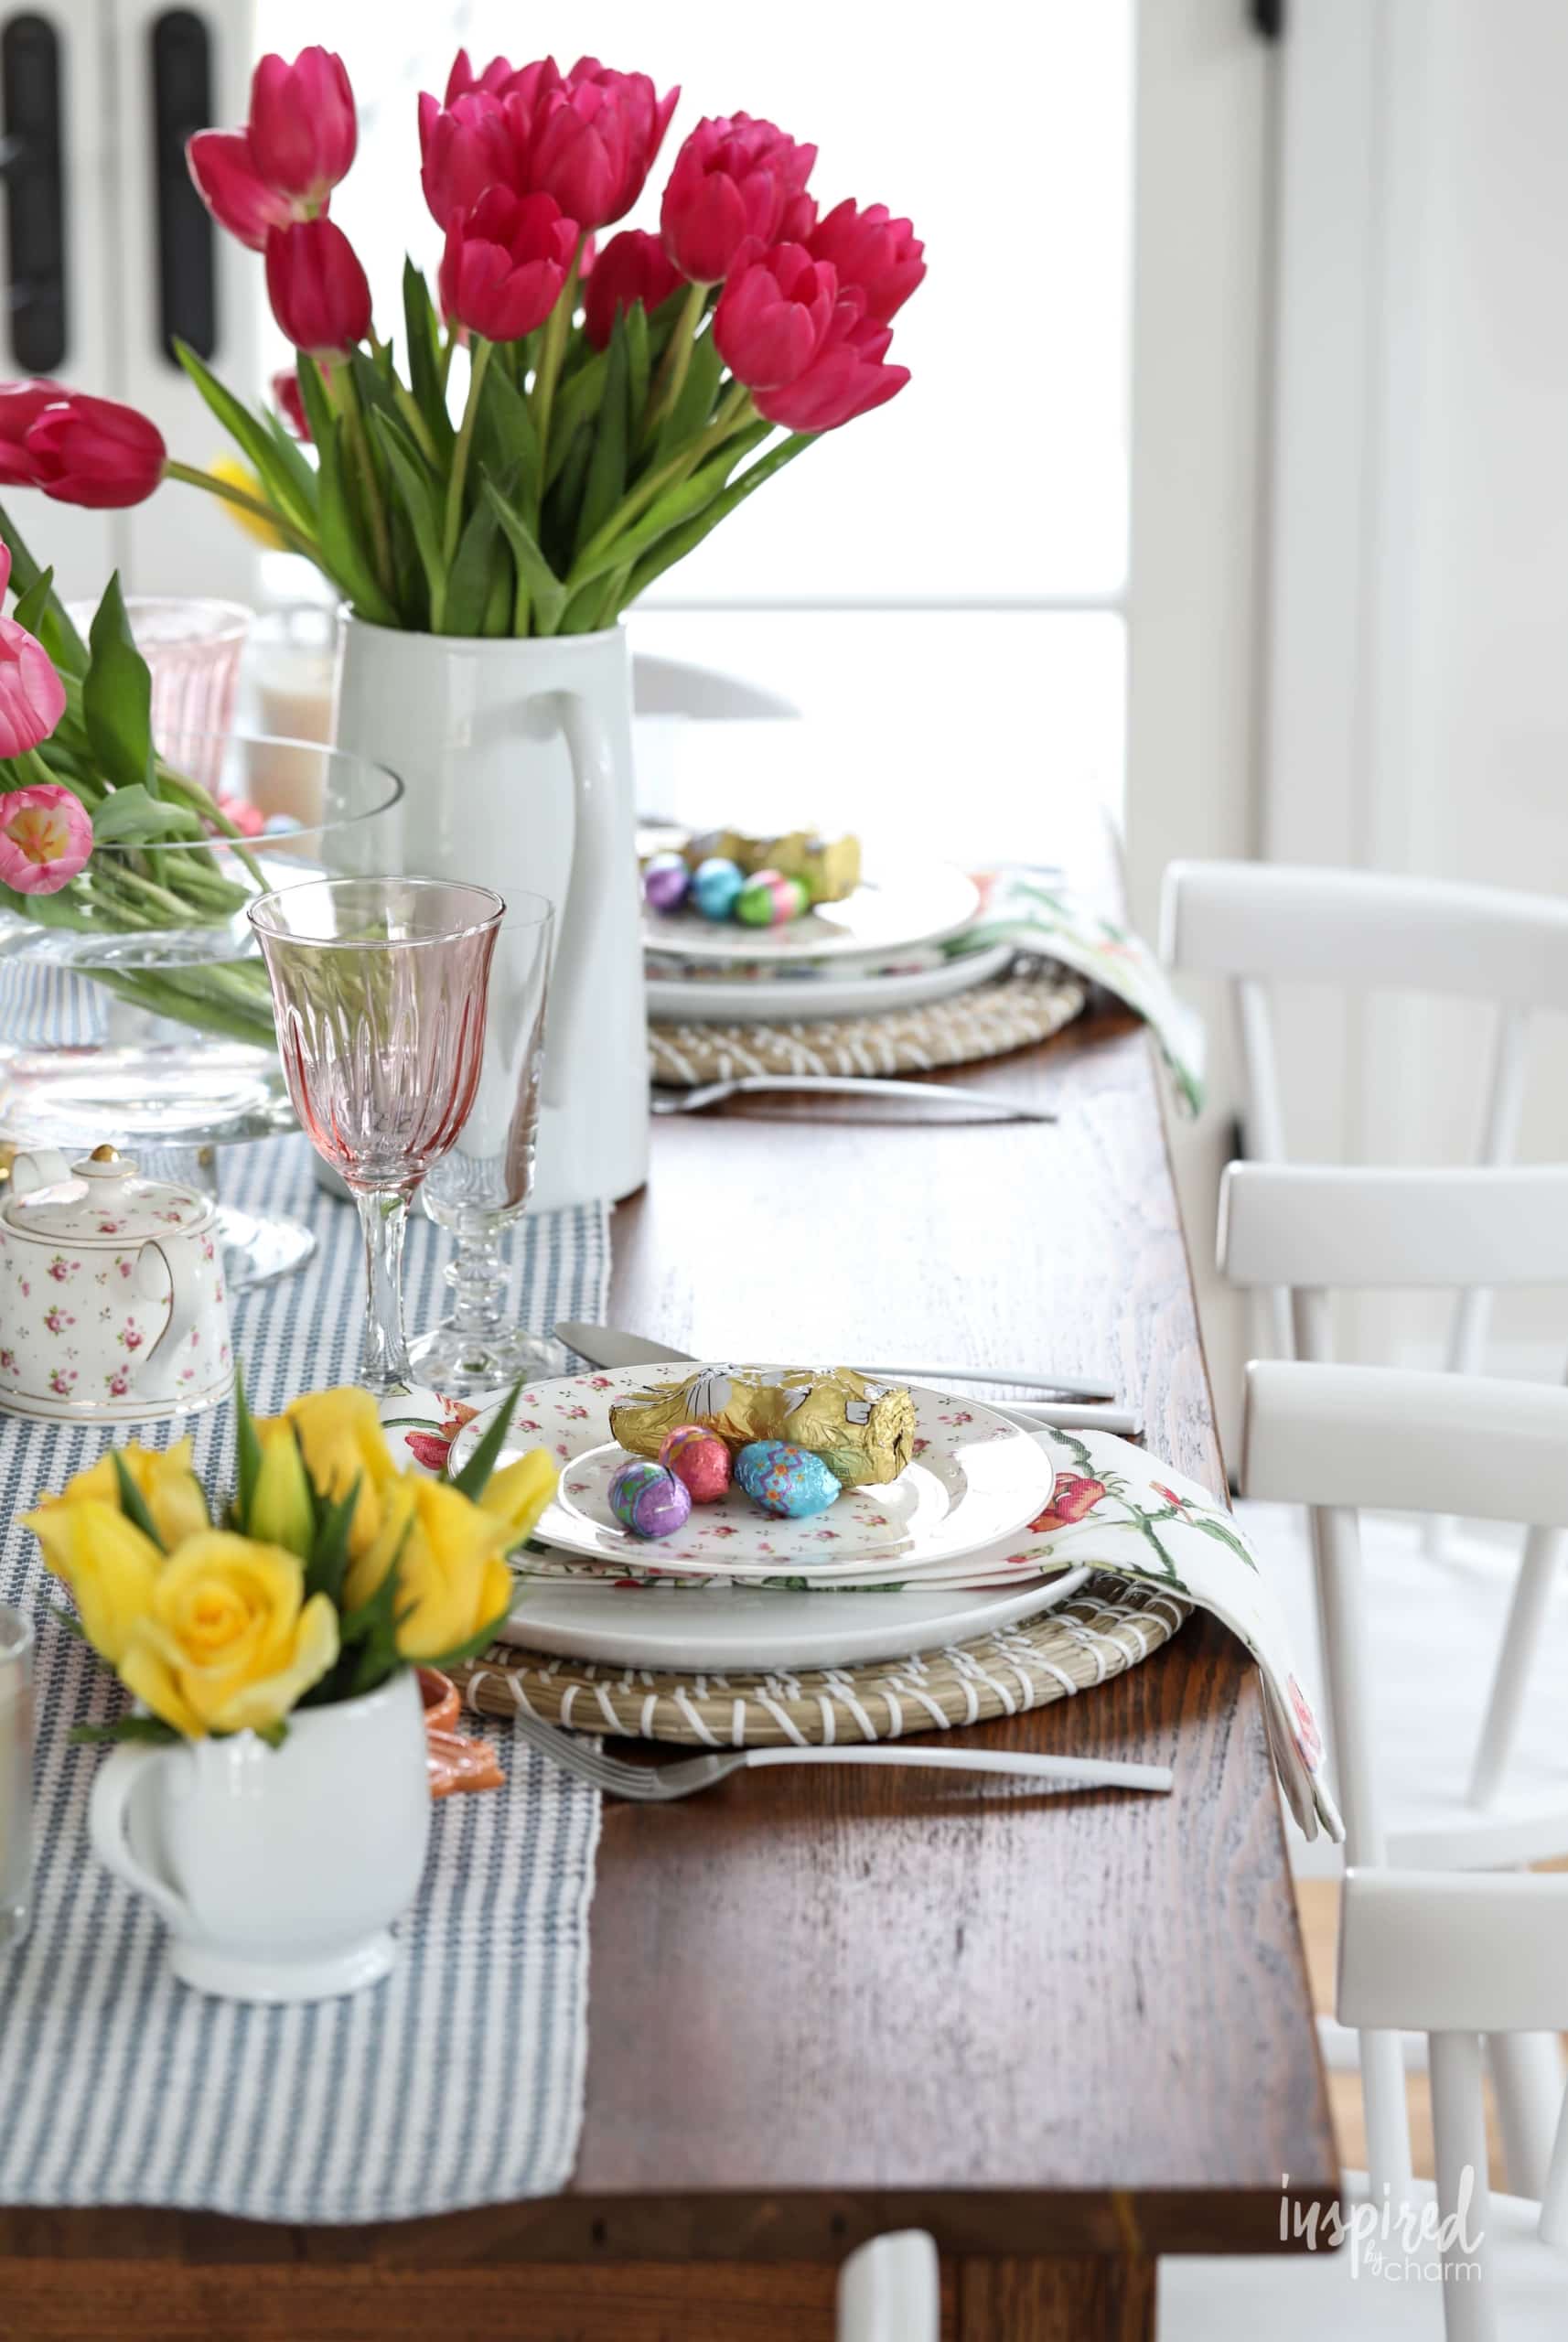 Floral-Inspired Easter Table Decor